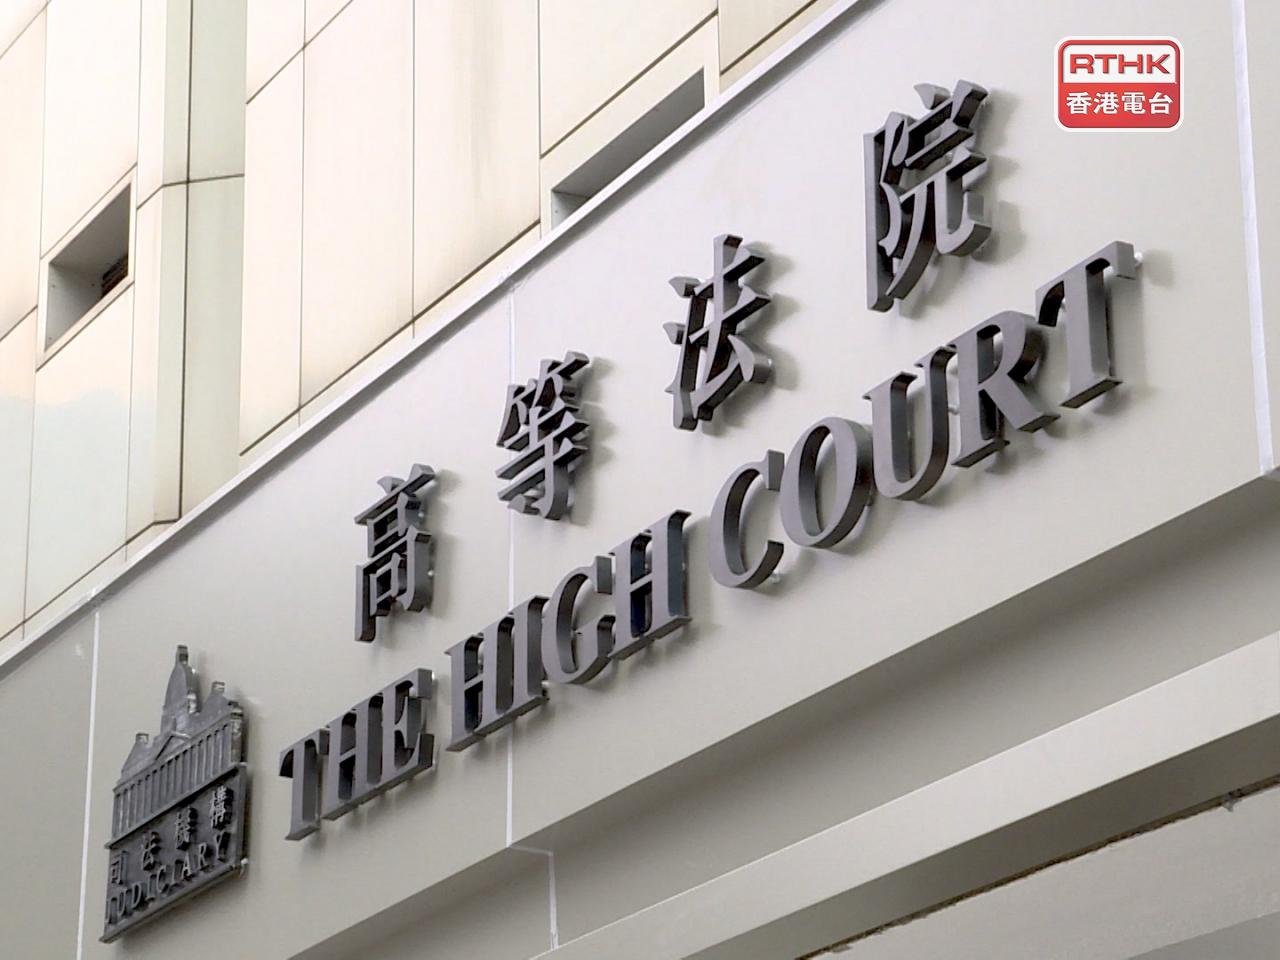 Court grants injunction over 'Glory to Hong Kong'